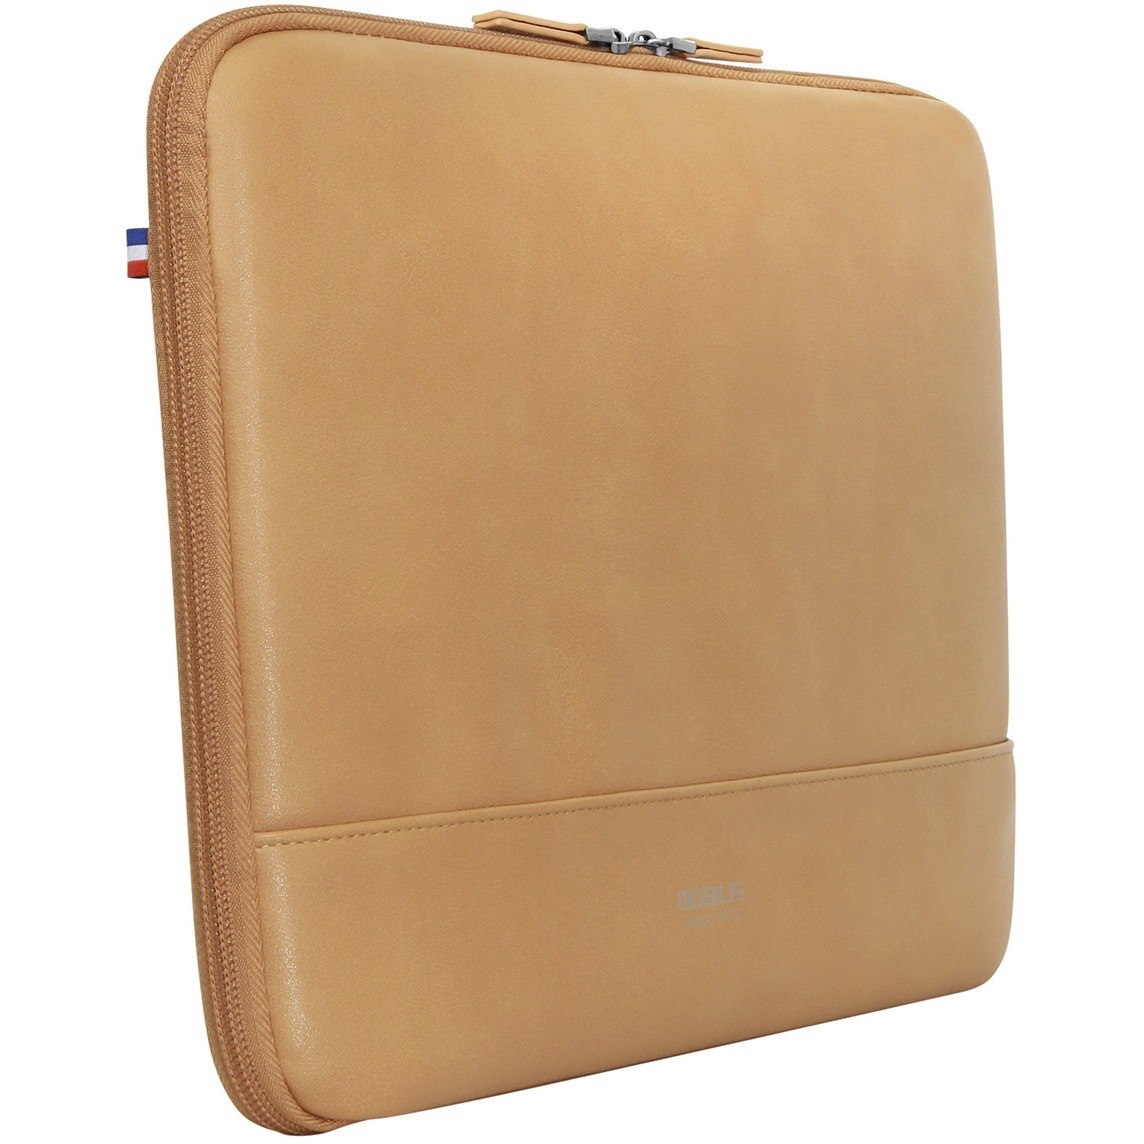 MOBILIS Origine Carrying Case (Sleeve) for 25.4 cm (10") to 31.8 cm (12.5") Apple MacBook, Notebook - Tan